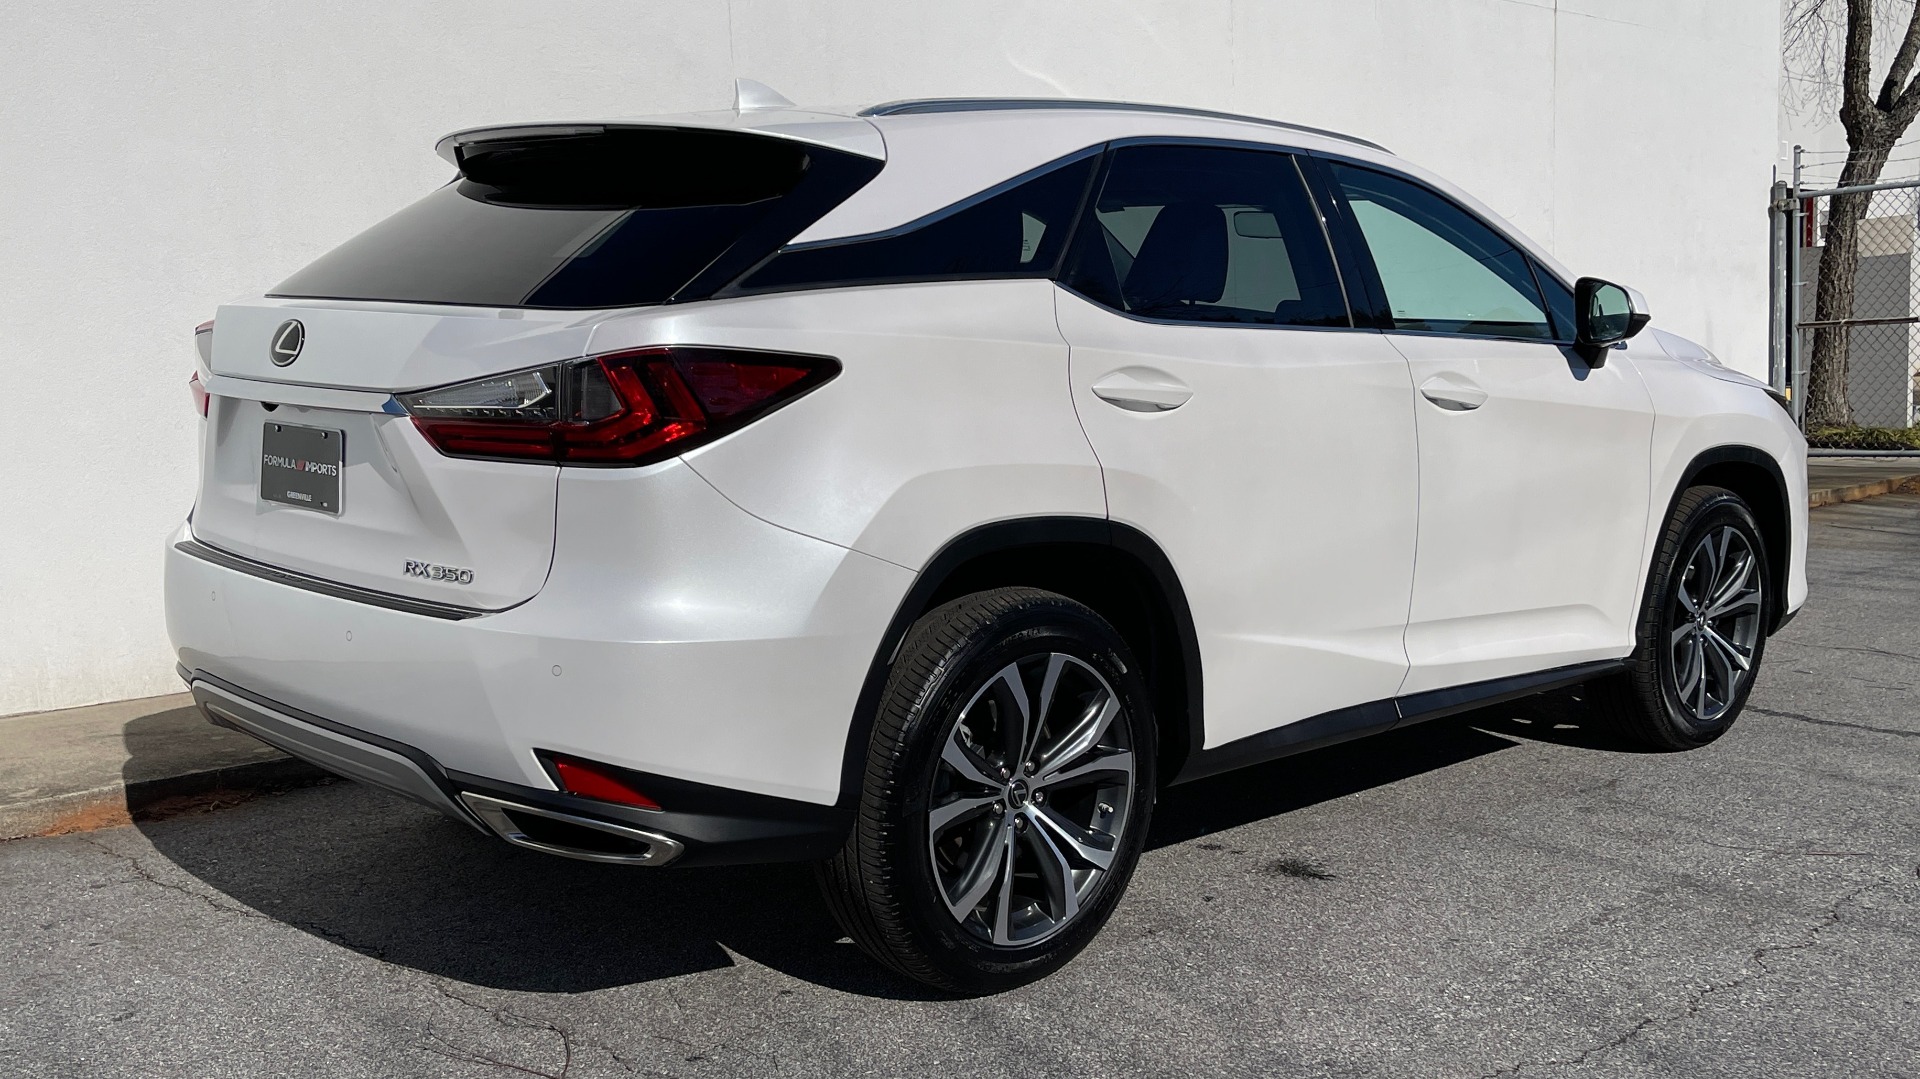 Used 2020 Lexus RX 350 PREMIUM 3.5L SUV / SUNROOF / TOW PREP / VENT STS / REARVIEW for sale Sold at Formula Imports in Charlotte NC 28227 4